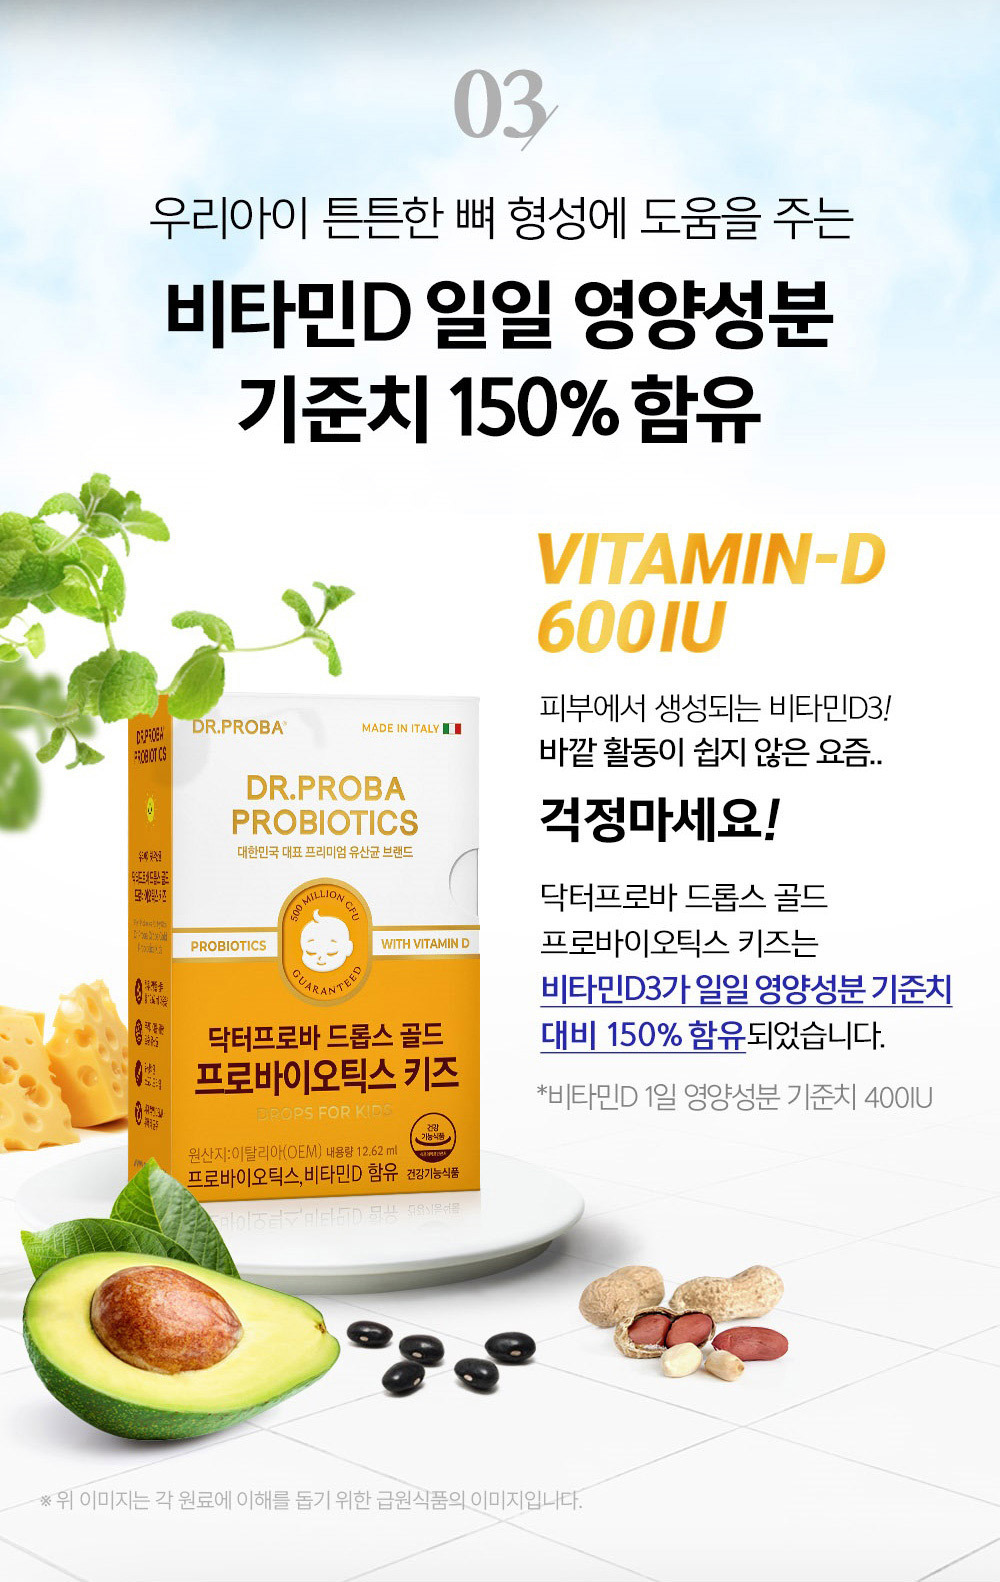 03 VI7AMIN-D 600IU Contains 150% of the daily nutritional value of vitamin D that helps your child build strong bones. Vitamin D3 produced in the skin! It's not easy to get outside these days... Don't worry! Dr. Proba Drops Gold Probiotics Kids contains 150% of the daily nutritional value of vitamin D3. Vitamin D daily nutritional standard 400IU The image above is an image of a food source to help you understand each ingredient.